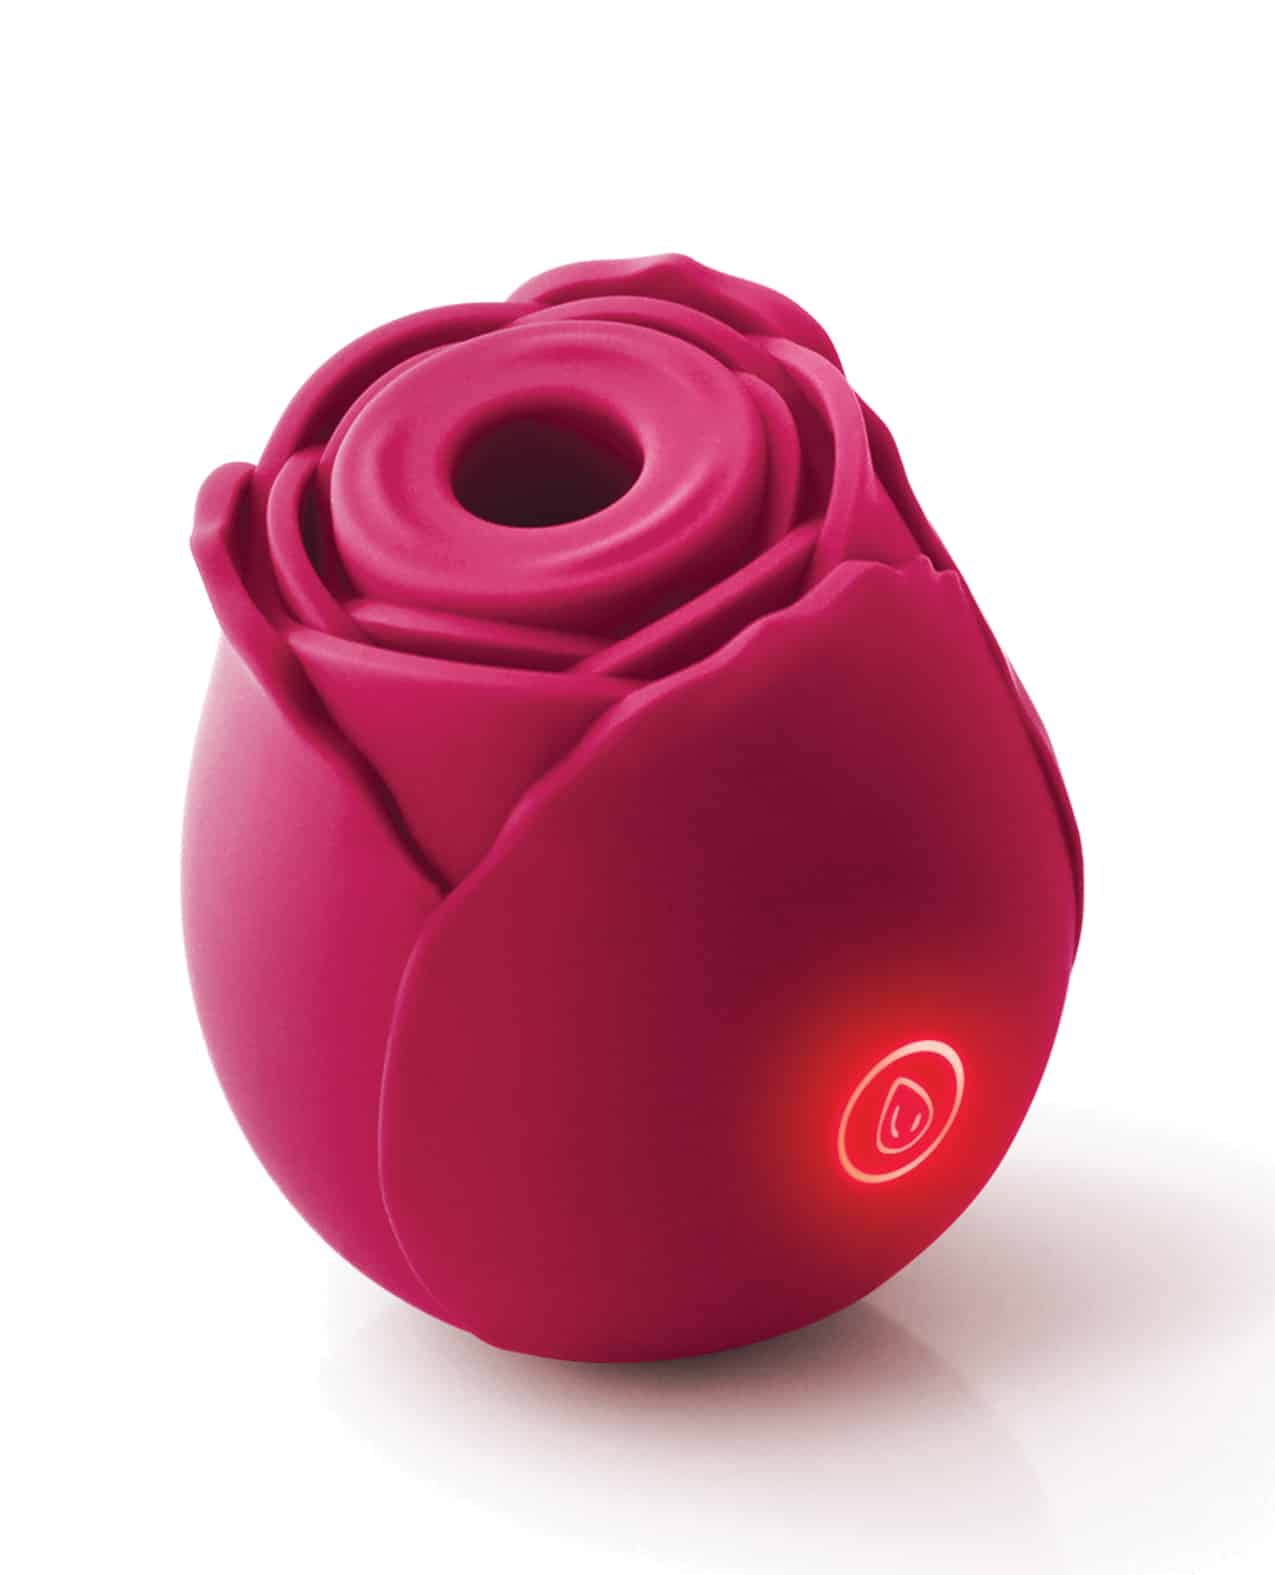 The Rose Rechargeable Clit Sucker Vibe